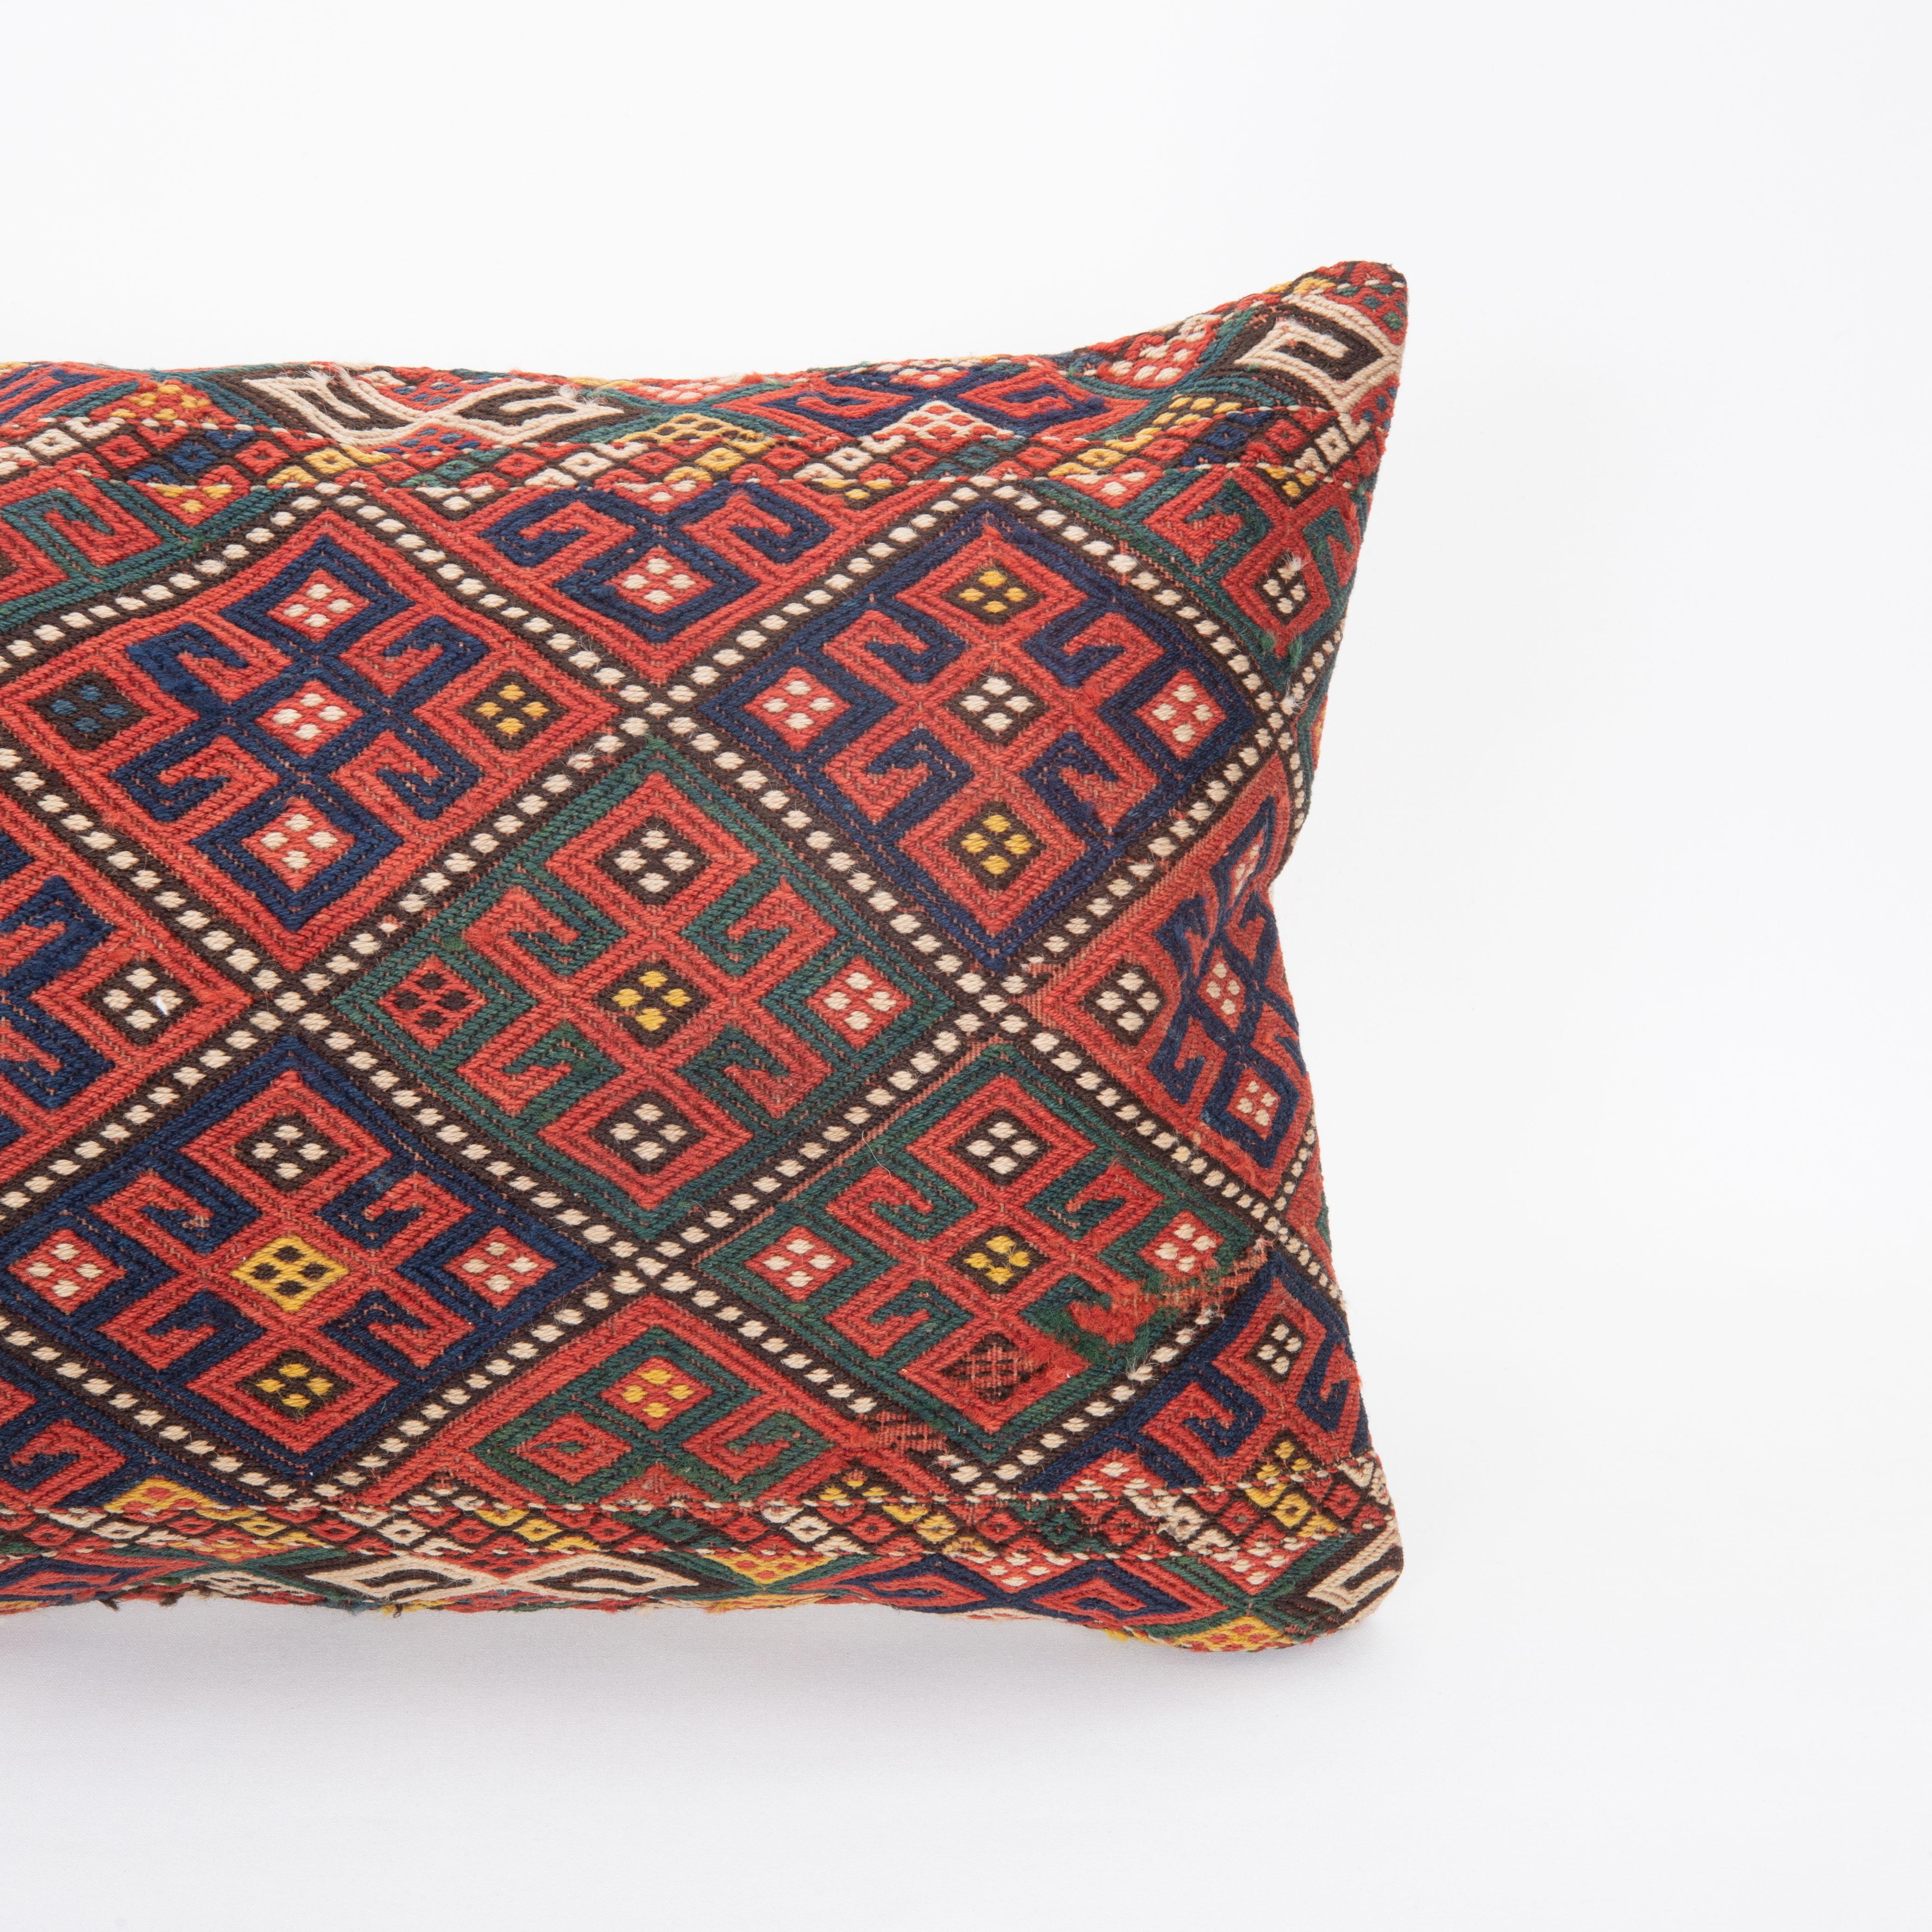 Azerbaijani Pillow Cover Fashioned from an Antique Caucasian Mafrash ( storage Bag ) Panel For Sale